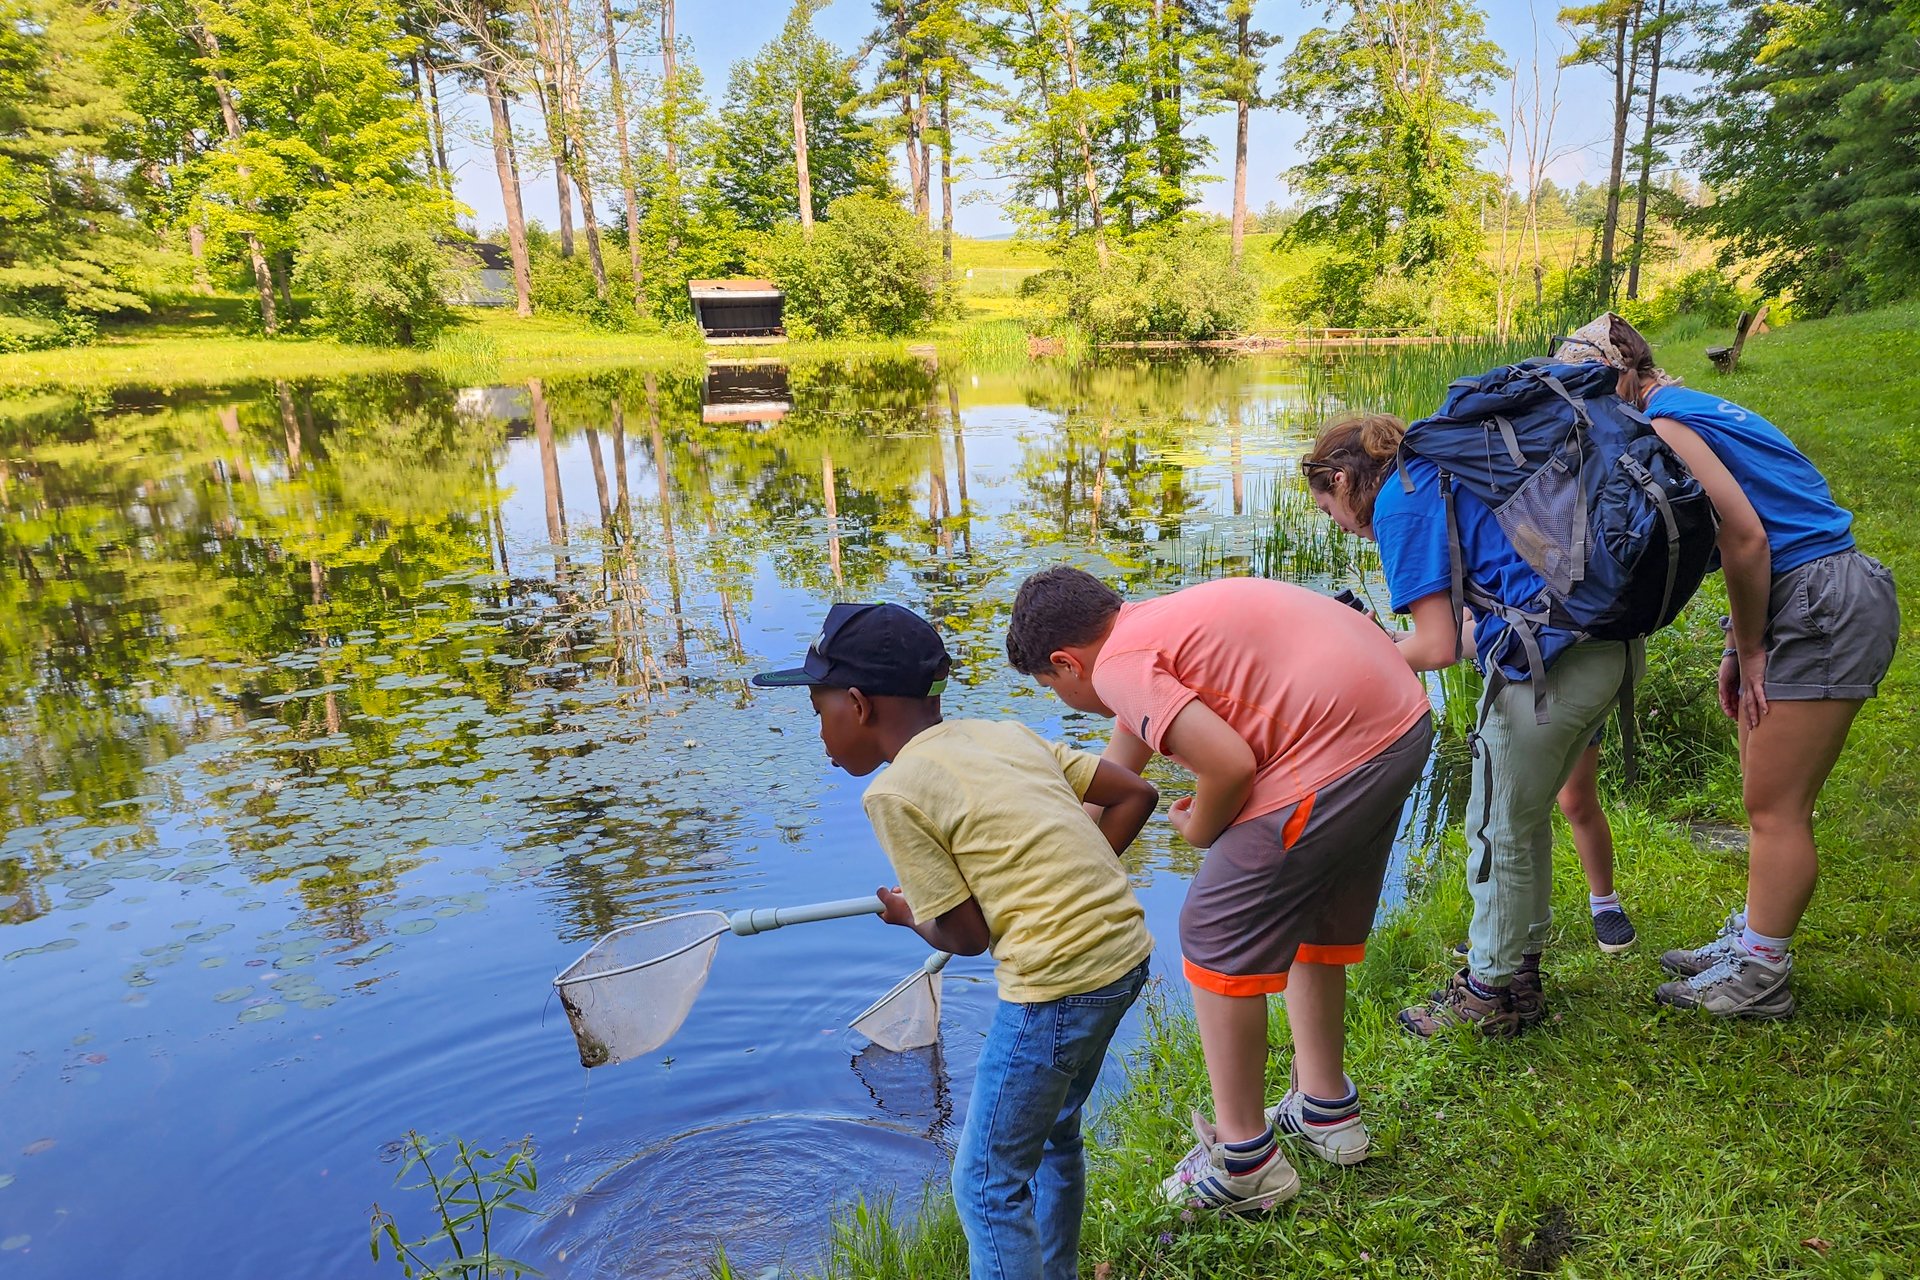 Campers and counselors at Berkshire Nature Camp use dip nets to look for aquatic wildlife in a freshwater pond